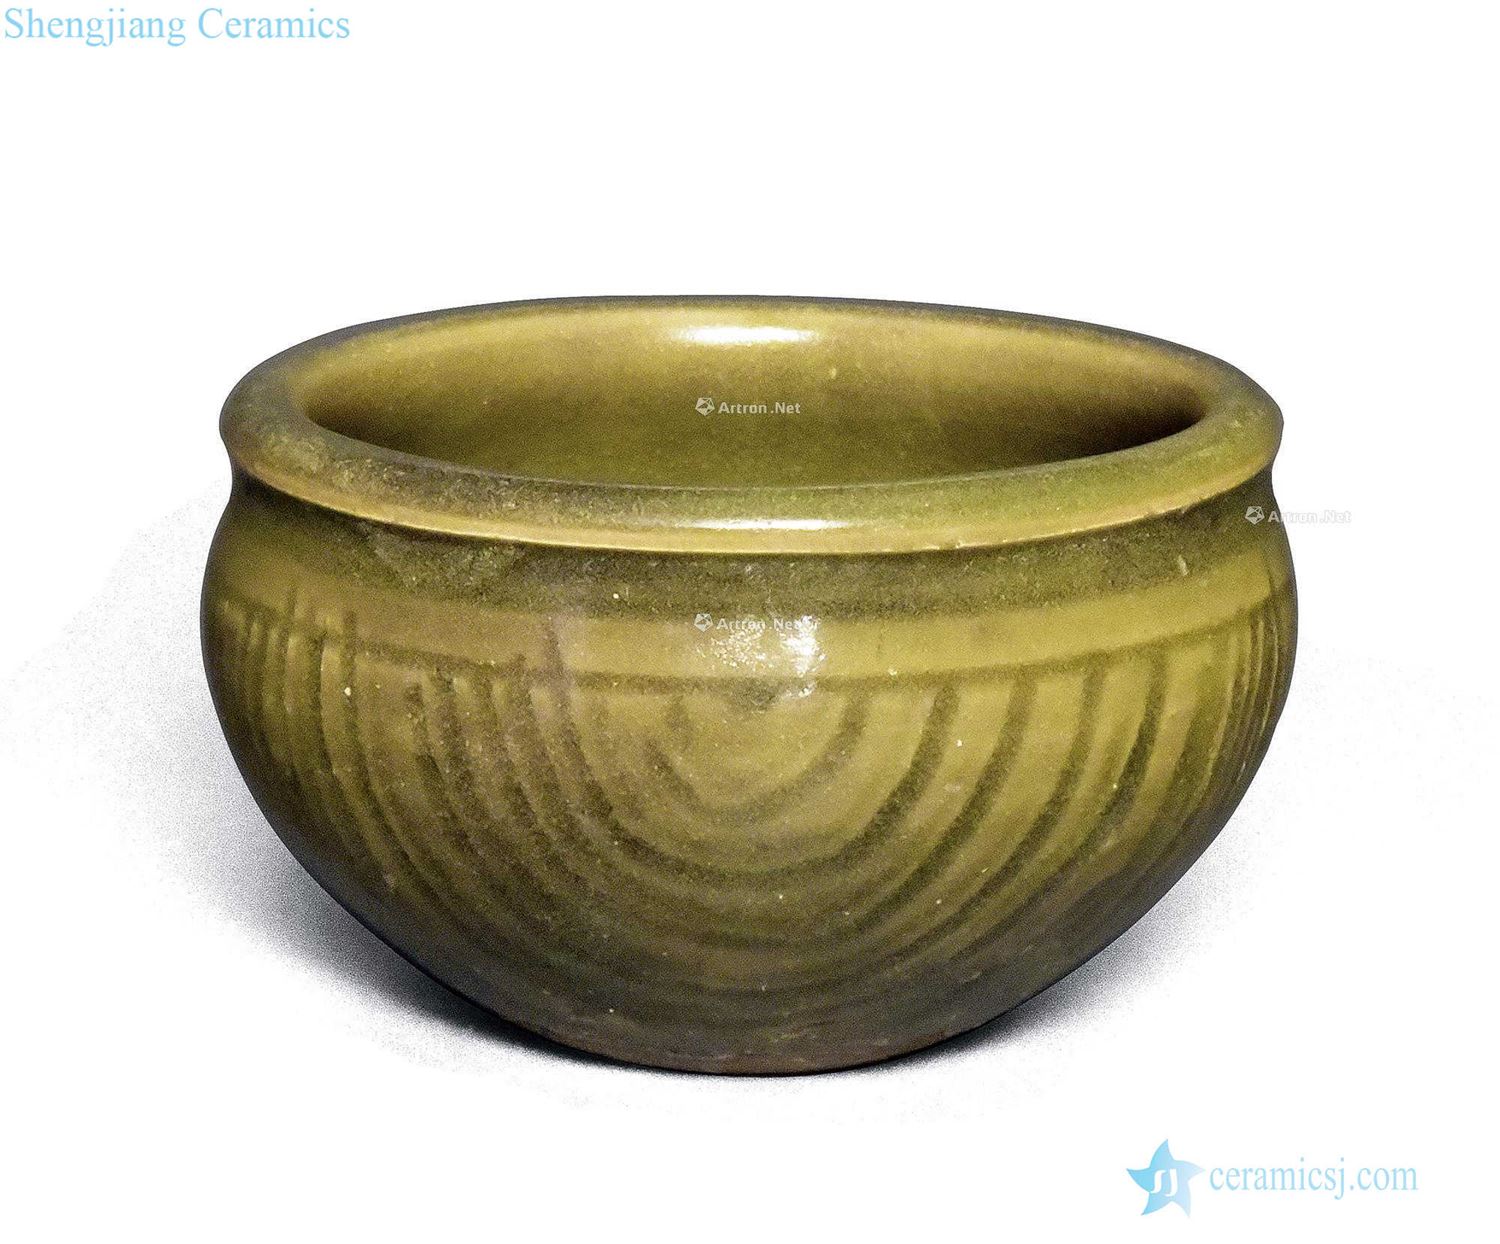 The song dynasty Yao state kiln green glaze hand-cut wicker canister